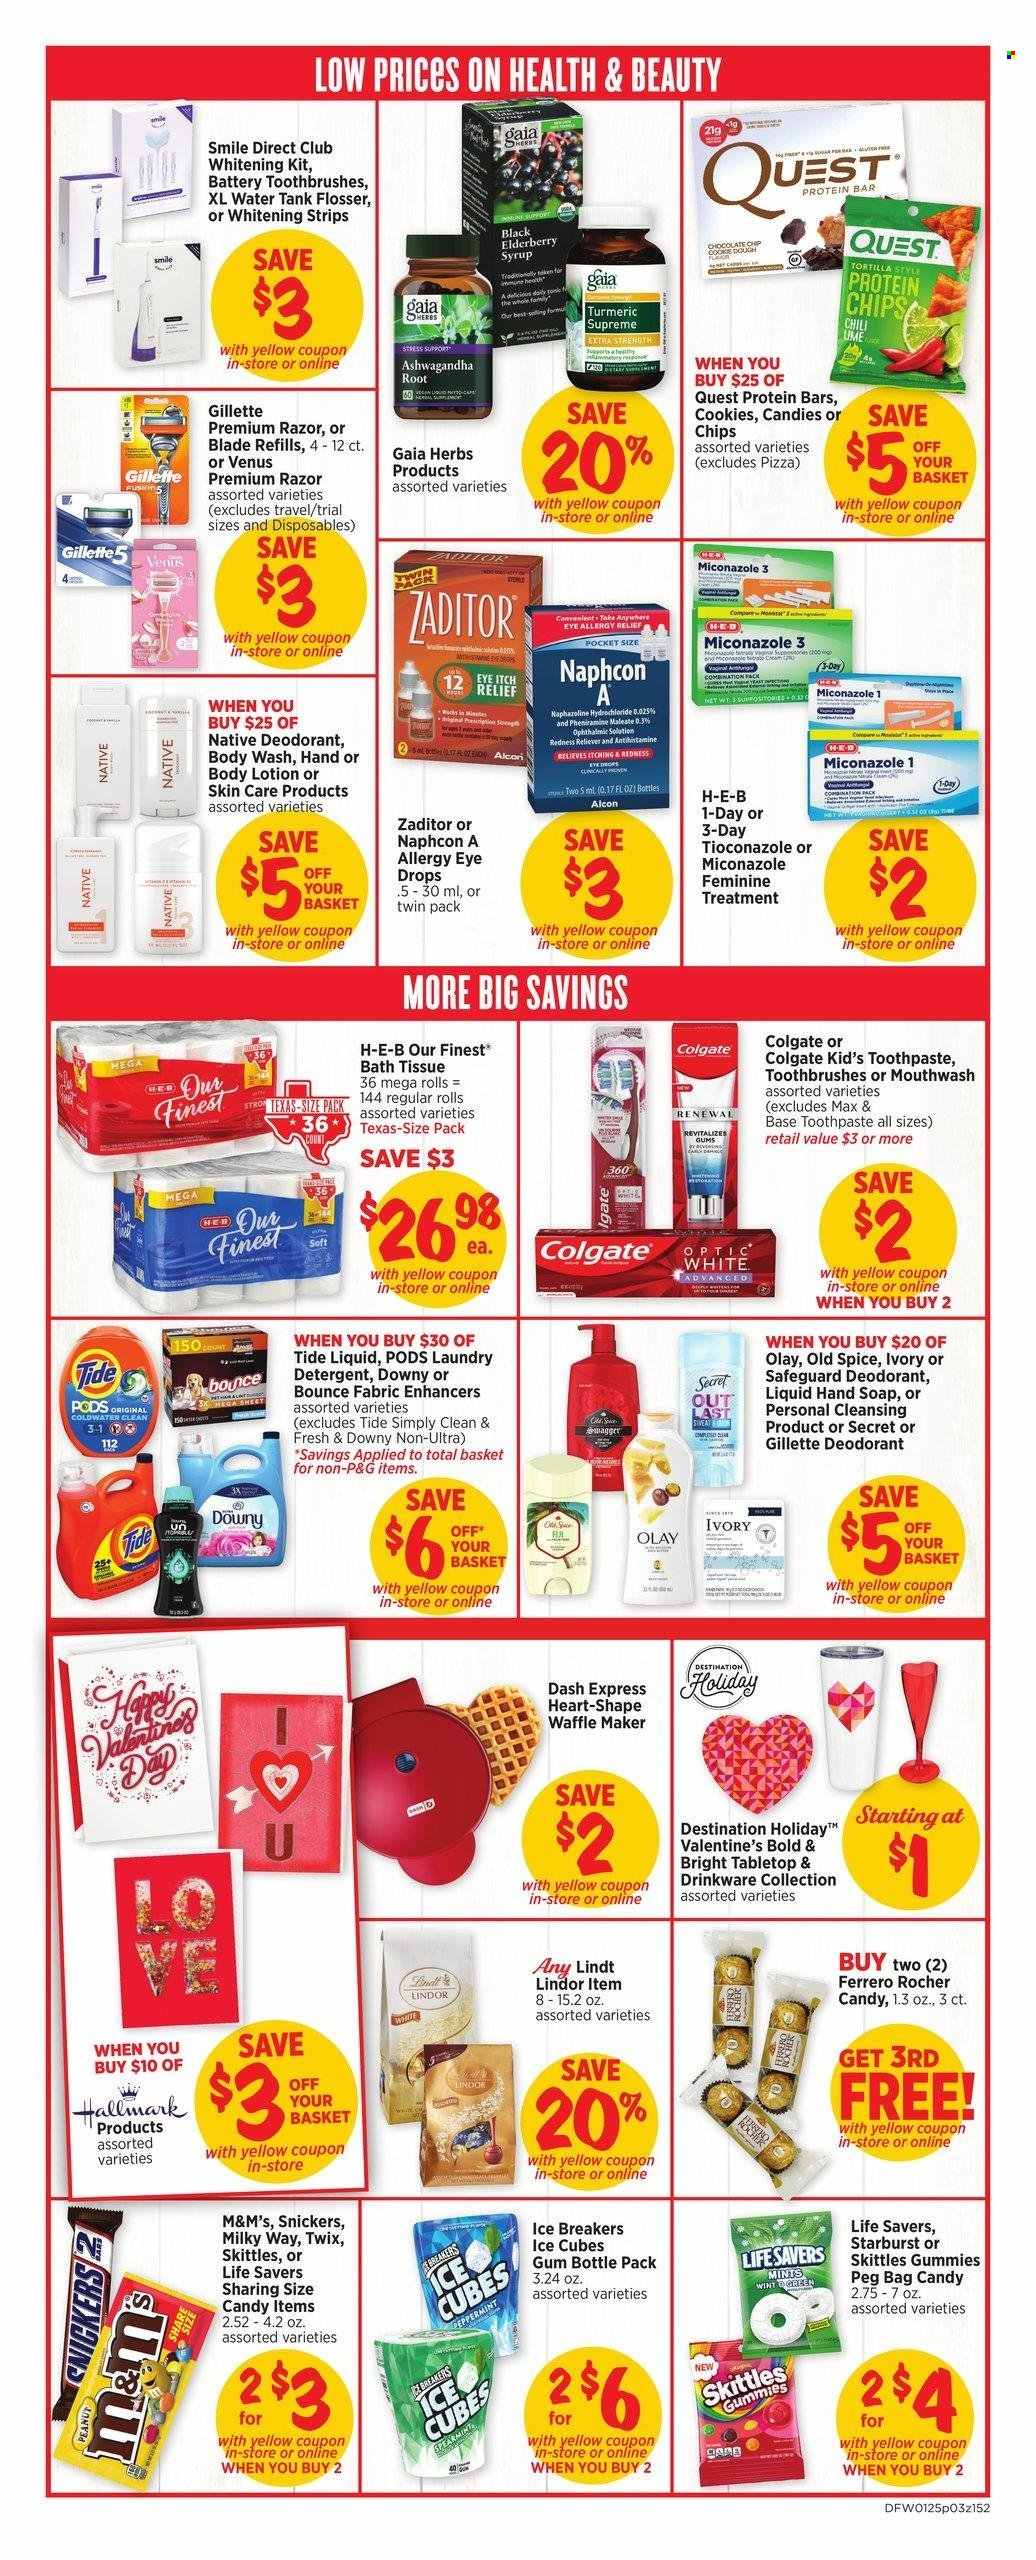 thumbnail - H-E-B Flyer - 01/25/2023 - 01/31/2023 - Sales products - tortillas, cod, pizza, strips, cookies, chocolate, ice cubes gum, Lindt, Lindor, Ferrero Rocher, Milky Way, Snickers, Twix, M&M's, Skittles, Gaia, Starburst, chips, protein bar, turmeric, spice, syrup, bath tissue, detergent, Tide, laundry detergent, Bounce, body wash, hand soap, Old Spice, soap, Colgate, toothpaste, mouthwash, Olay, body lotion, anti-perspirant, deodorant, Gillette, razor, Venus, drinkware, battery, tank, waffle maker, water tank, eye drops, allergy relief, Gaia Herbs, Gaia Herbs®. Page 3.